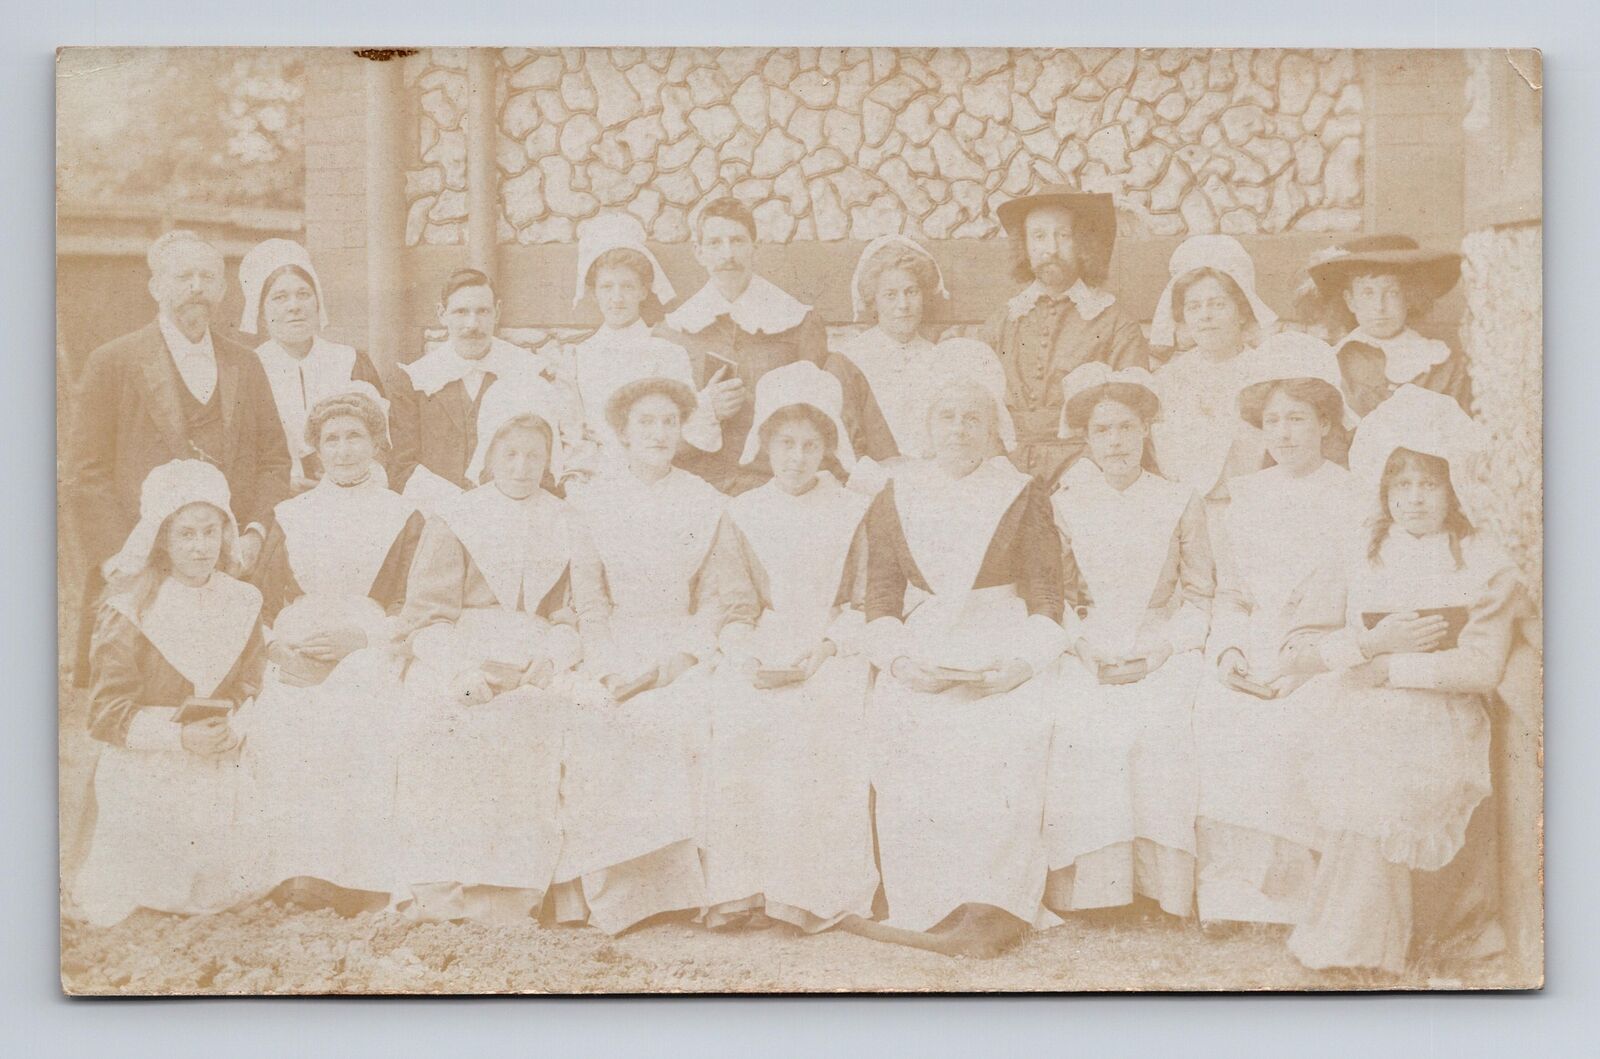 RPPC Postcard Group Photo of Men and Women in Unknown Uniforms or Costumes